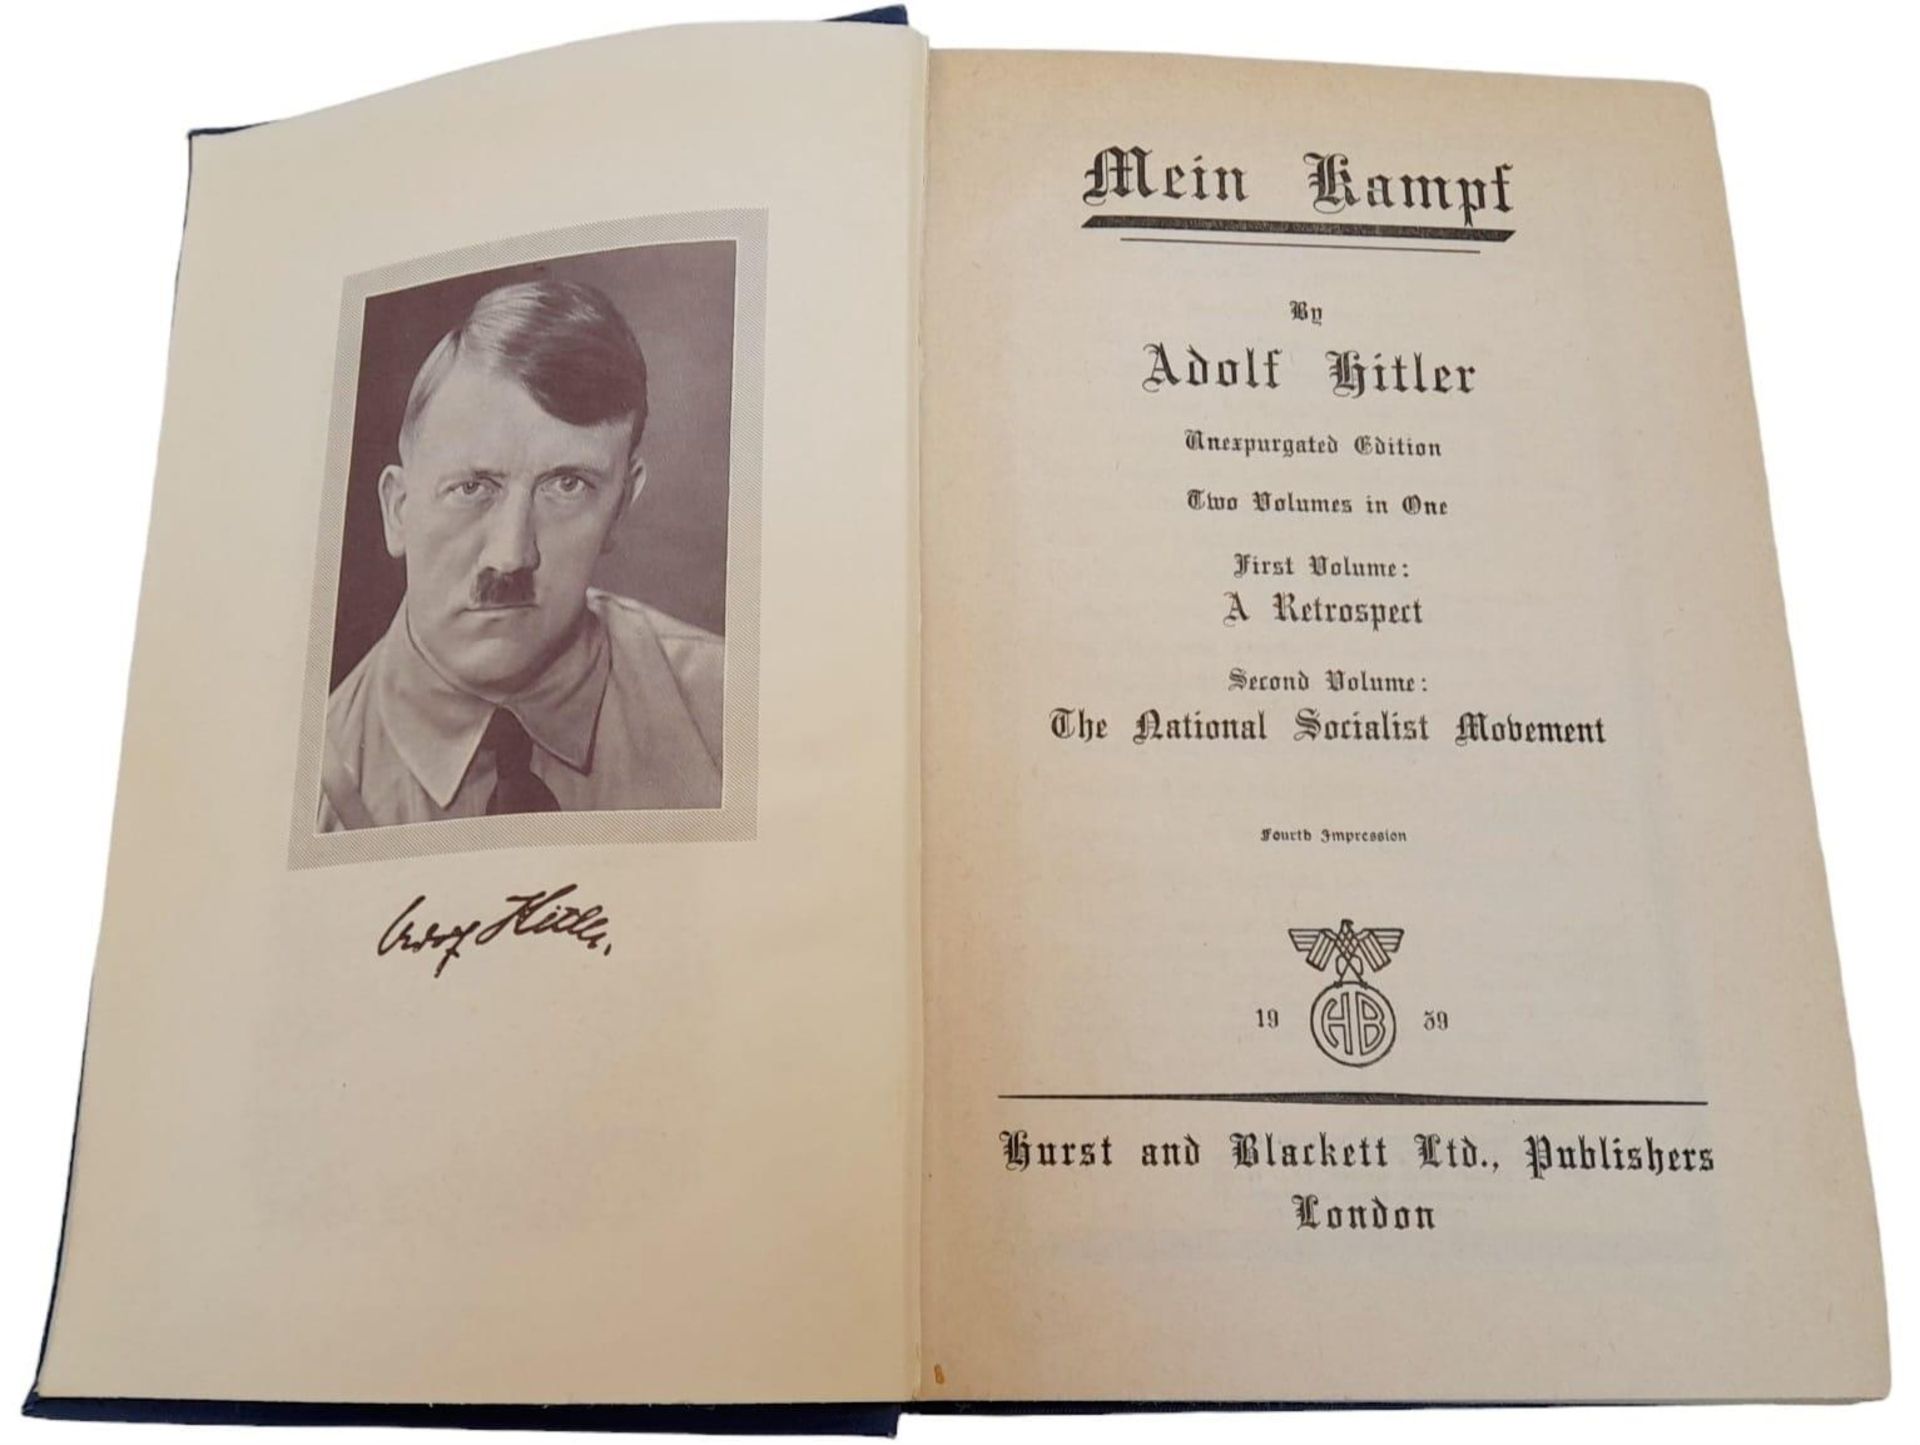 Hard Back ‘Adolf Hitler Mein Kampf’ Book. This is the English unexpurgated Edition Two Volumes in - Image 2 of 5